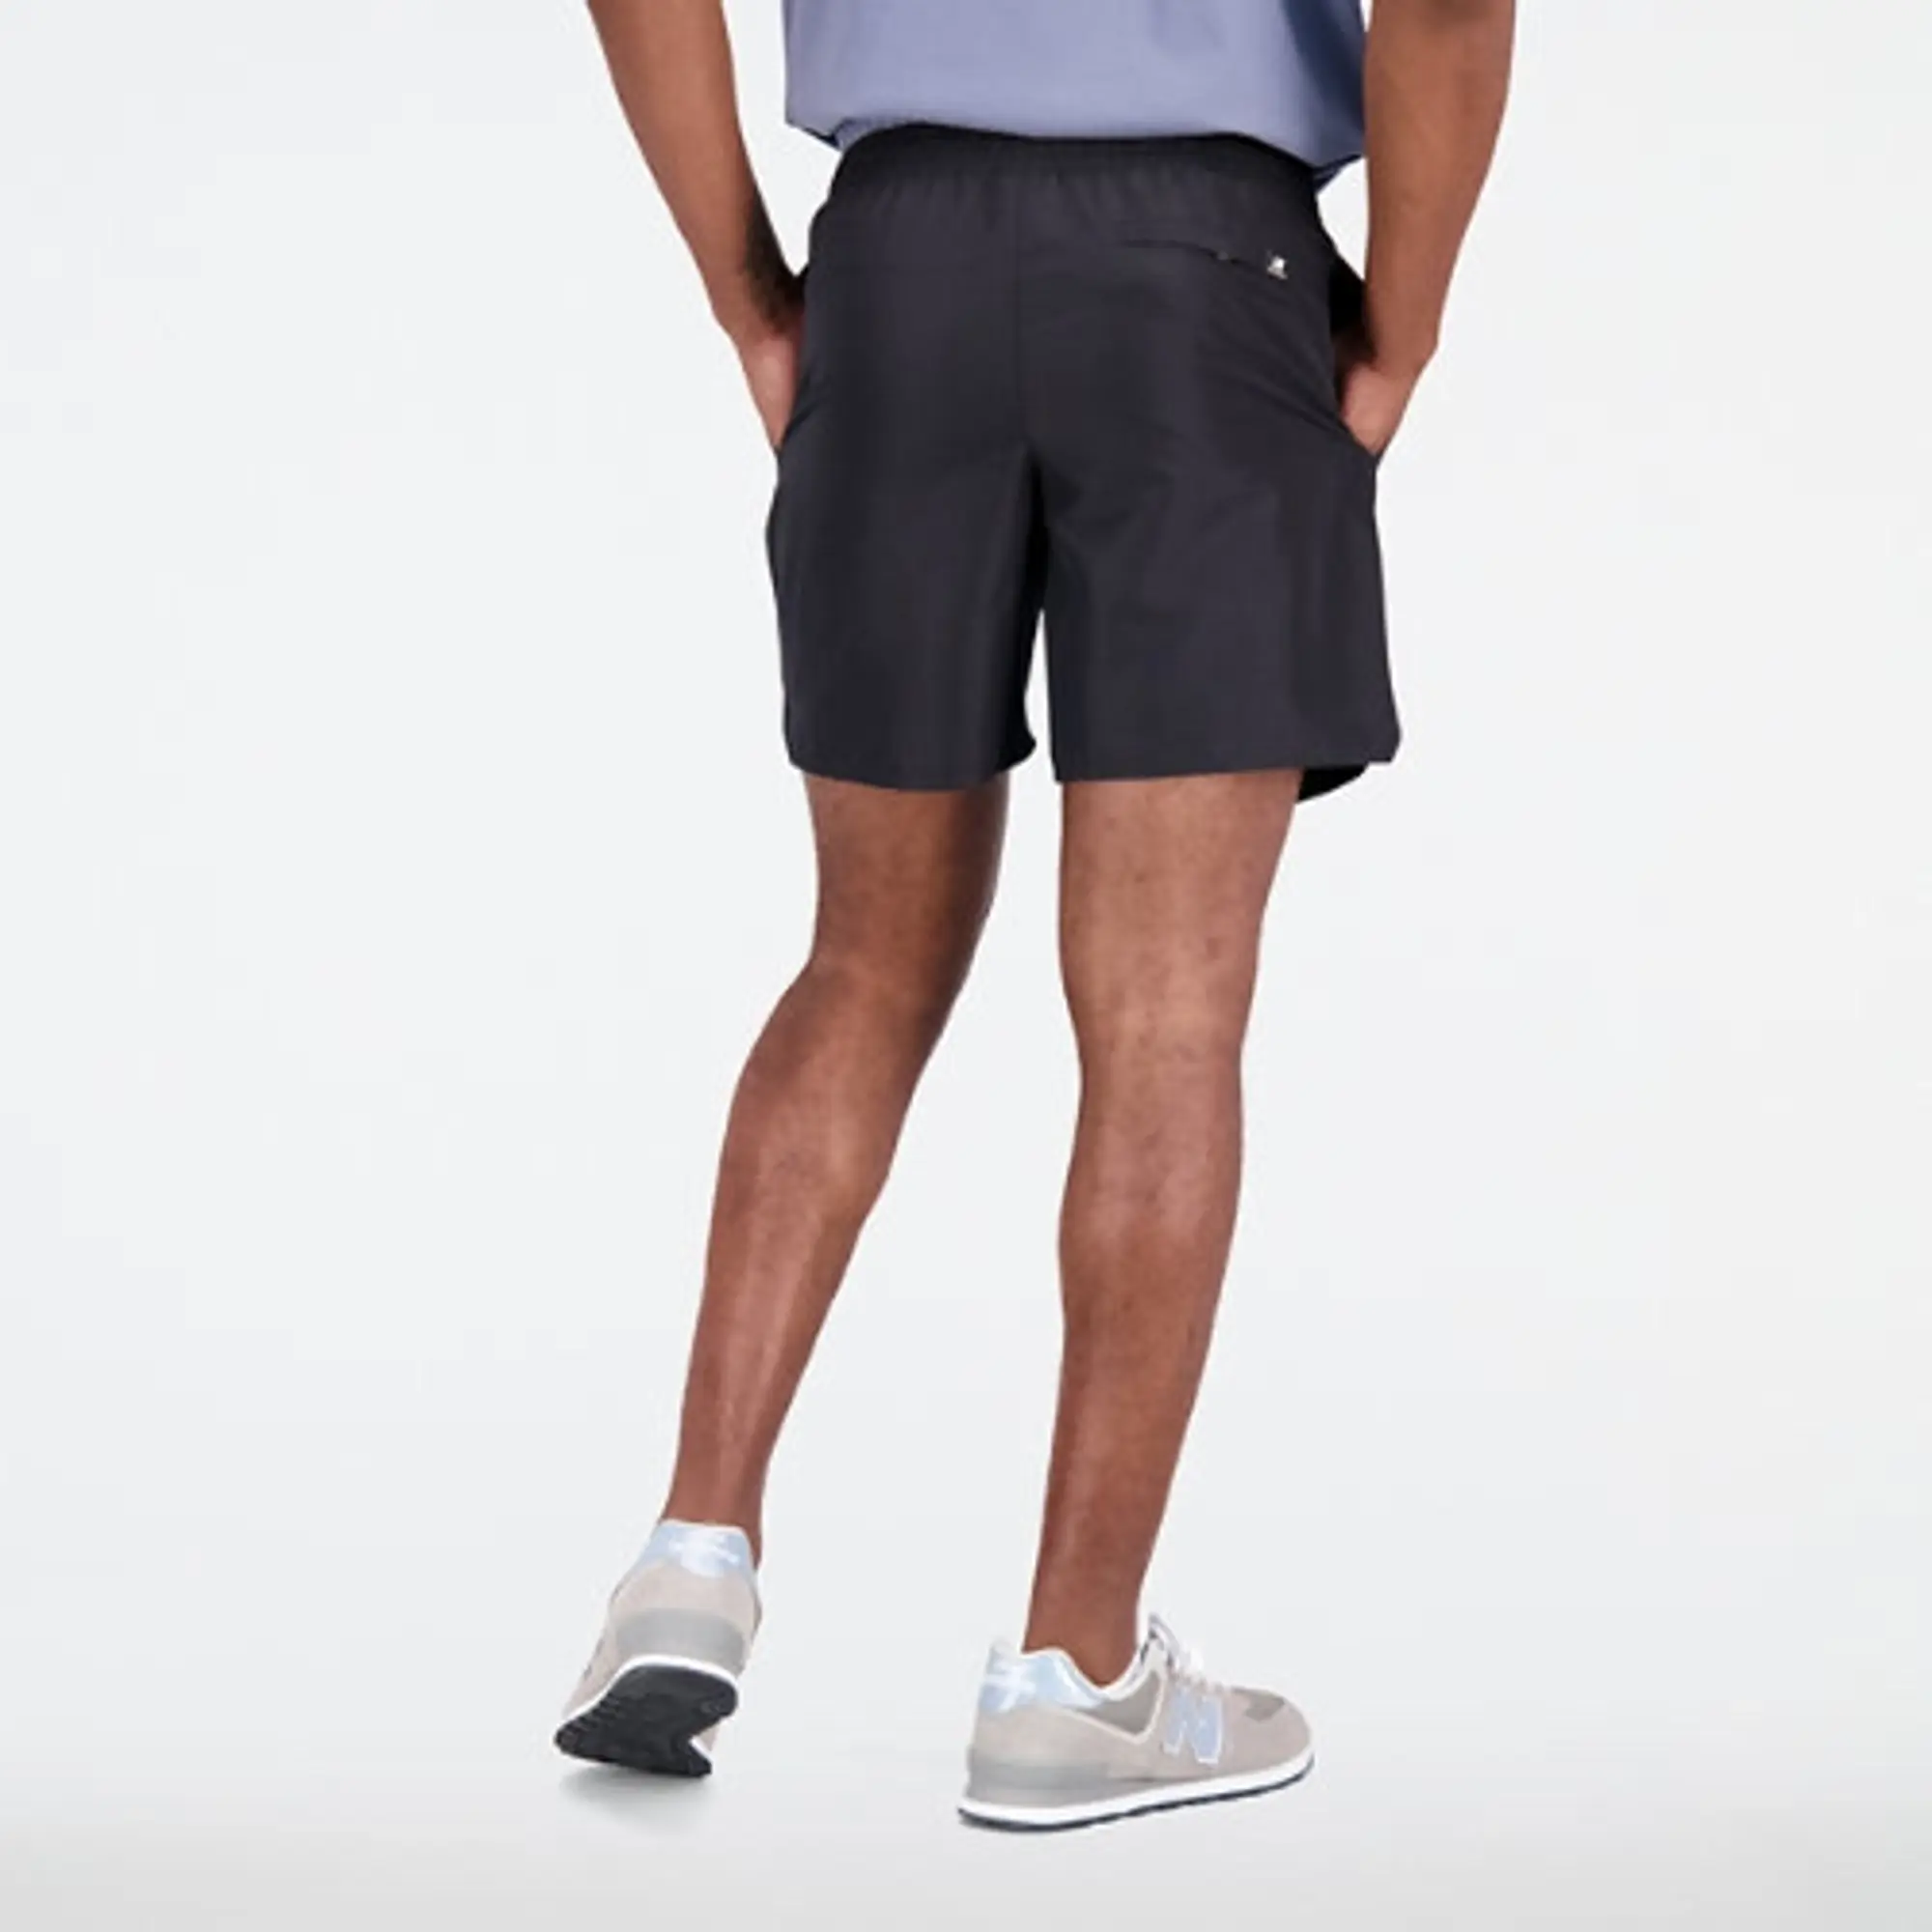 New Balance Men's Essentials Reimagined Woven Short in Black Polywoven